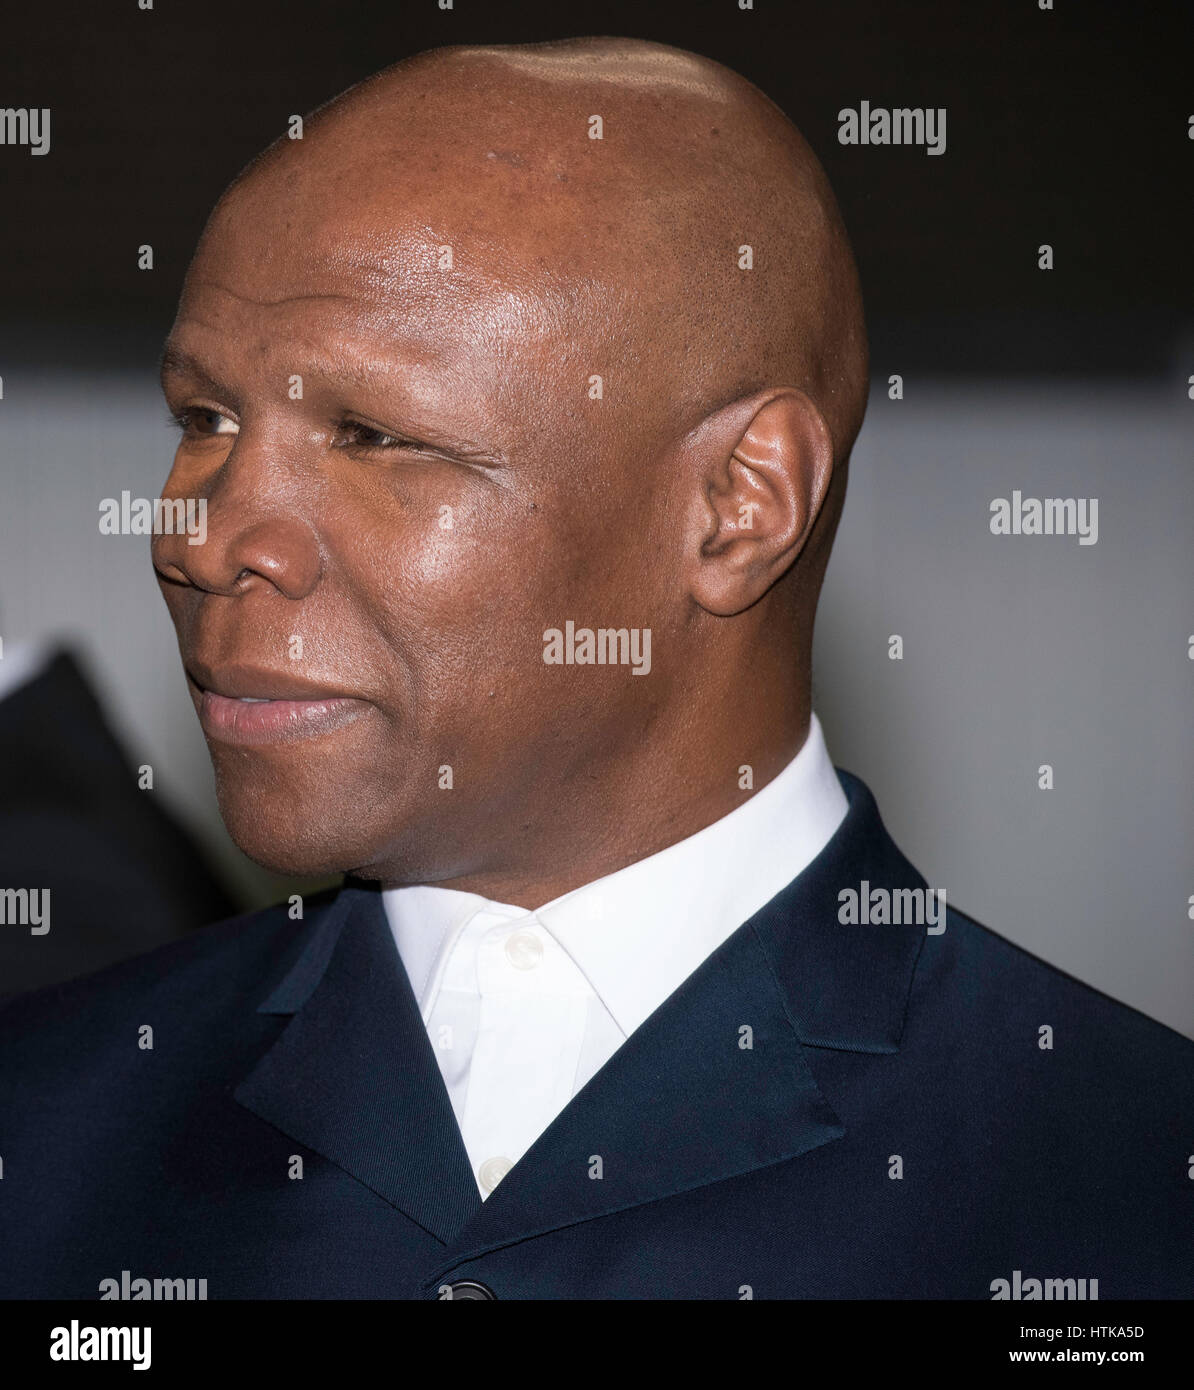 Brentwood, 12th March 2017; Chris Eubank, Former World boxing Champion, at a youth concert in Brentwood, Essex Credit: Ian Davidson/Alamy Live News Stock Photo